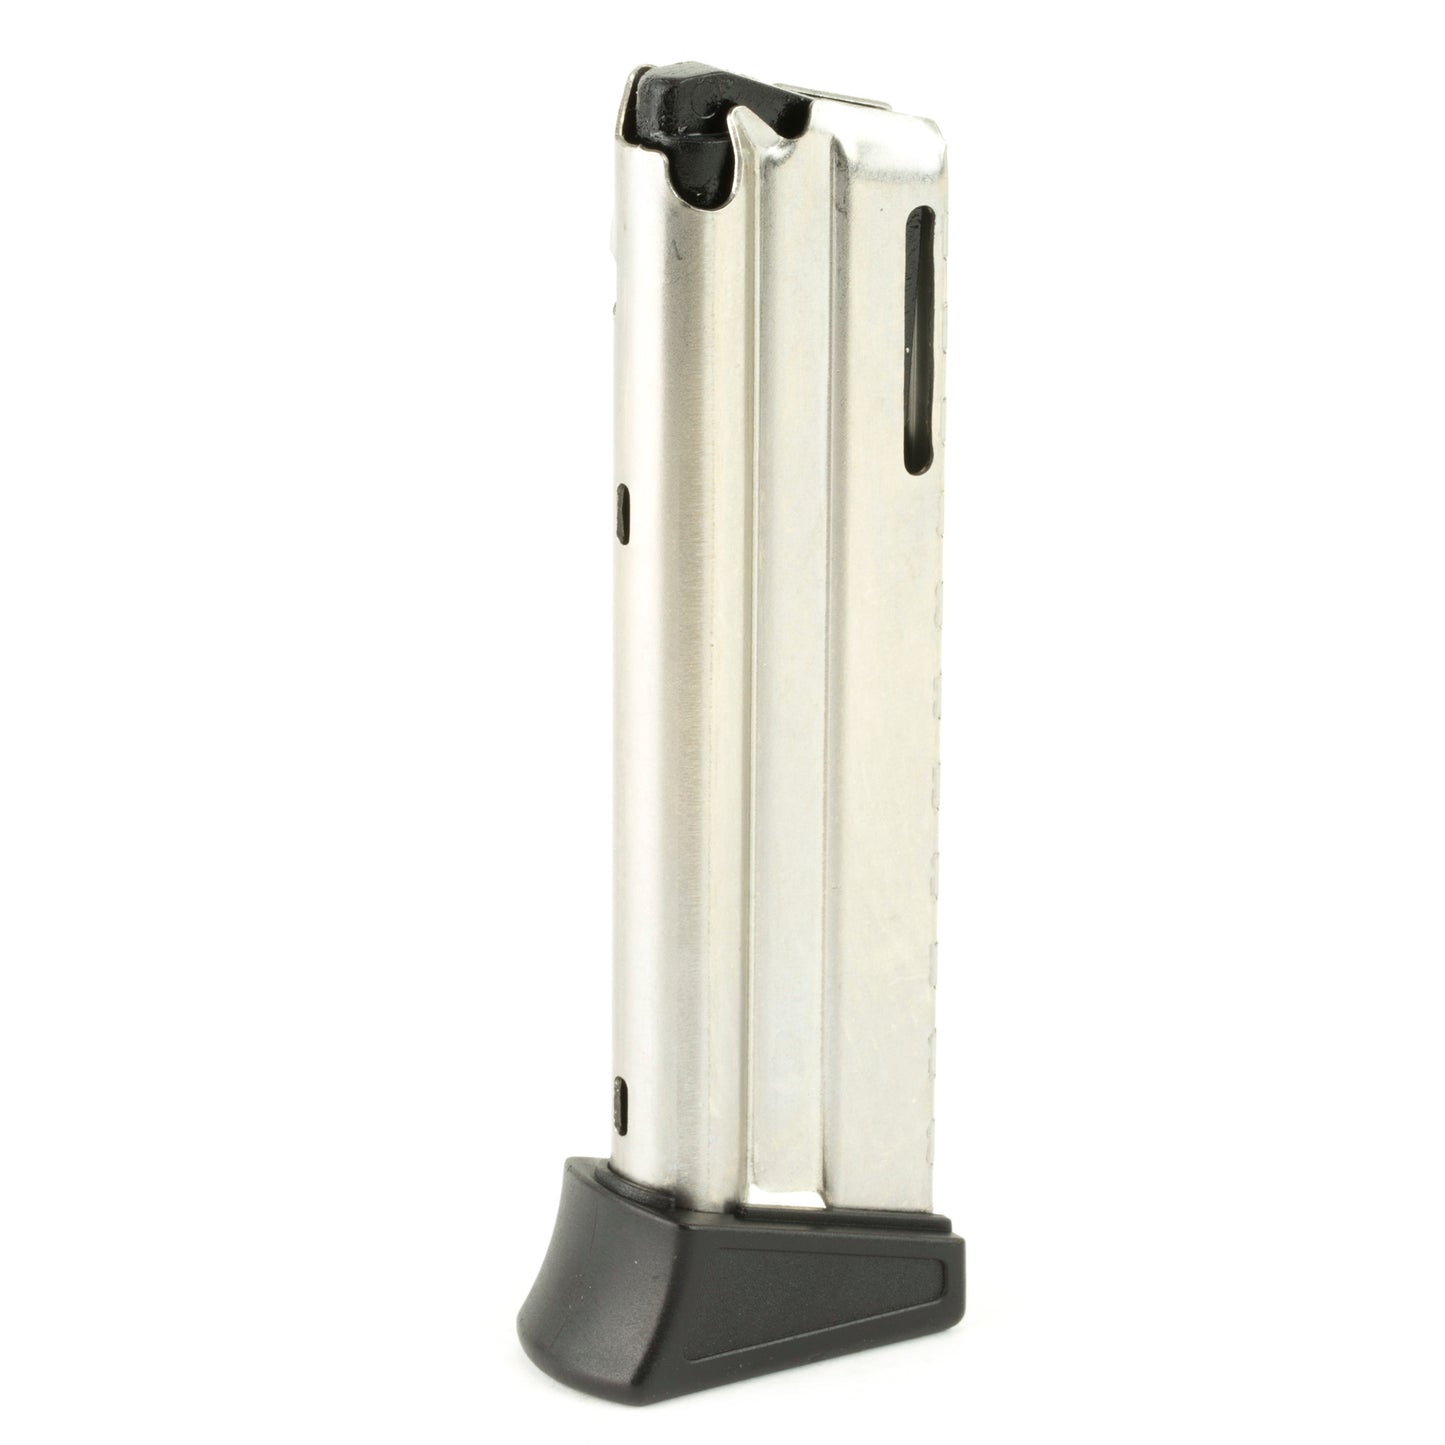 Walther Magazine 22LR 10 Rounds Fits PPK/S Stainless 503600 - California Shooting Supplies